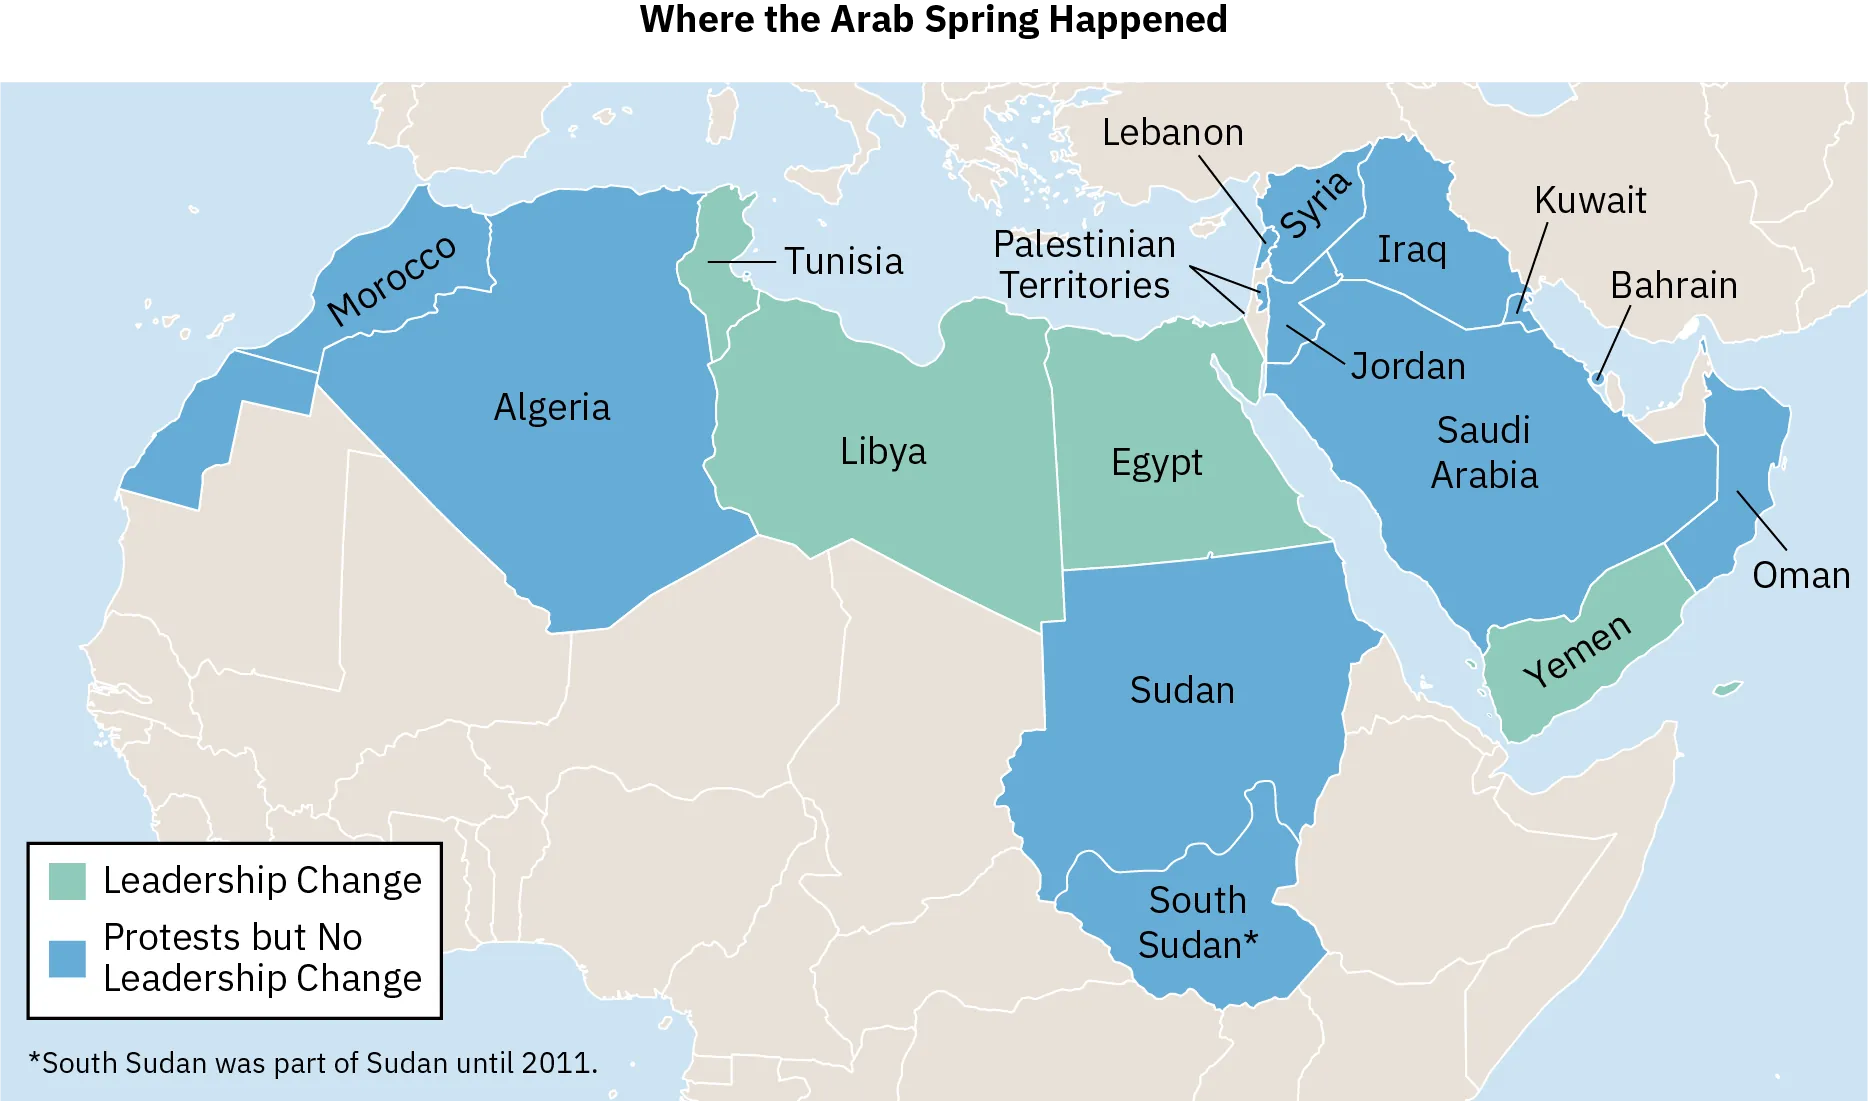 A map of the Middle East shows the area where the Arab Spring occurred. Tunisia, Libya, Egypt, and Yemen recorded a change in leadership, while other countries in the region recorded protests only.